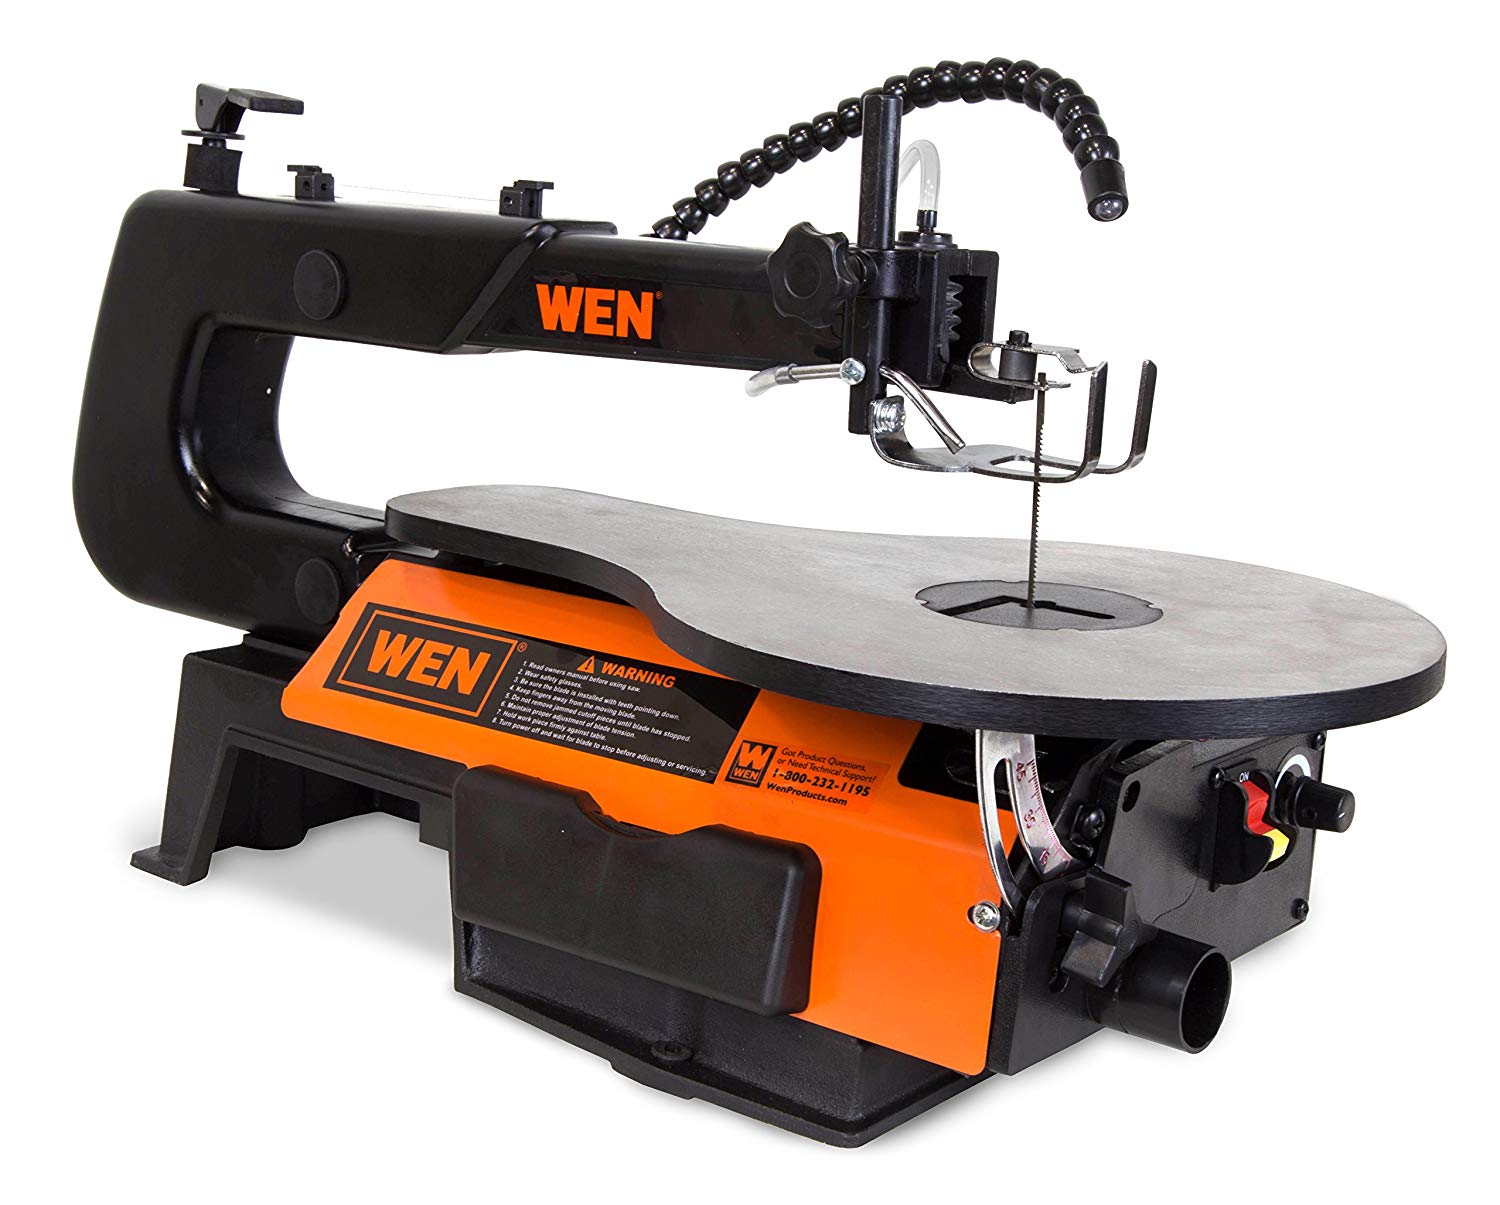 WEN Two-Direction Variable Speed Scroll Saw